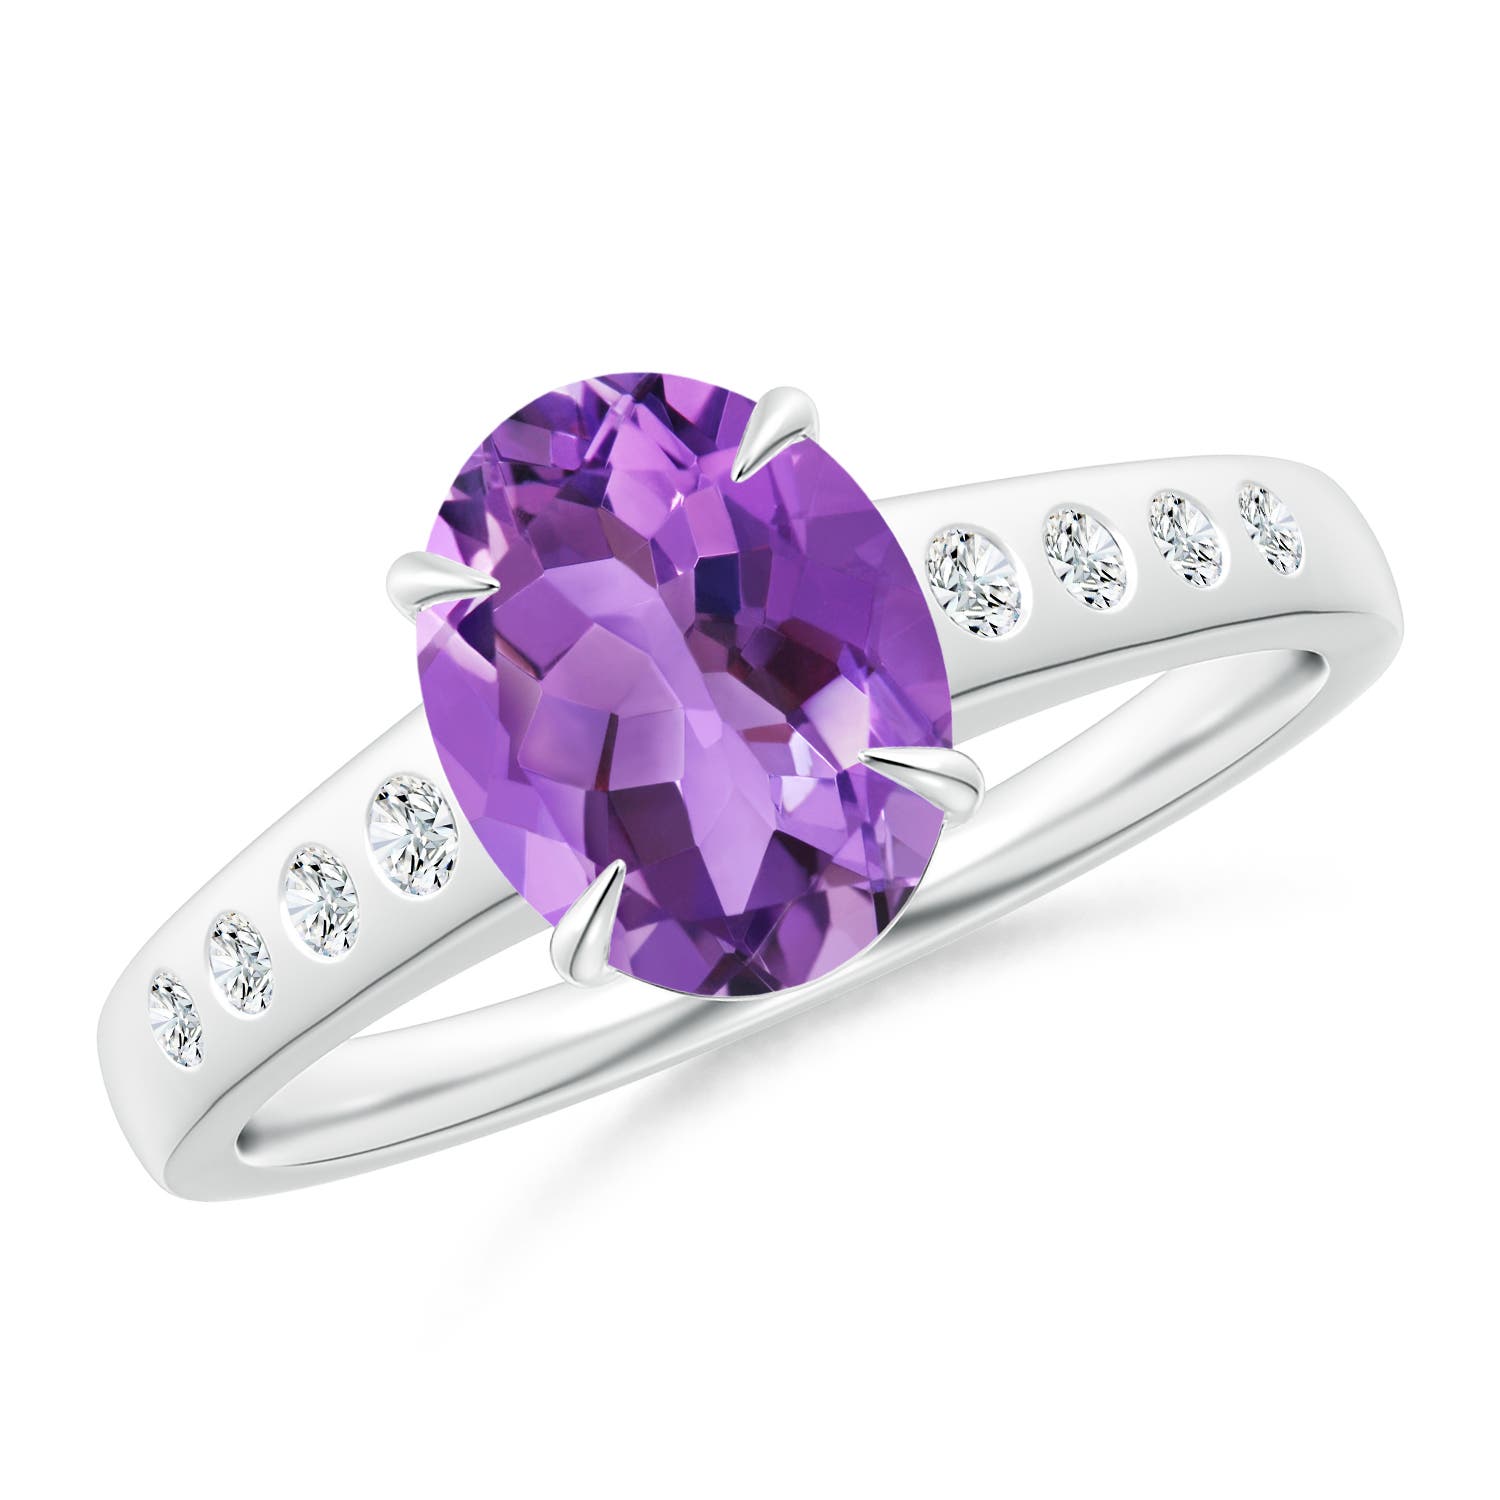 AA - Amethyst / 1.79 CT / 14 KT White Gold